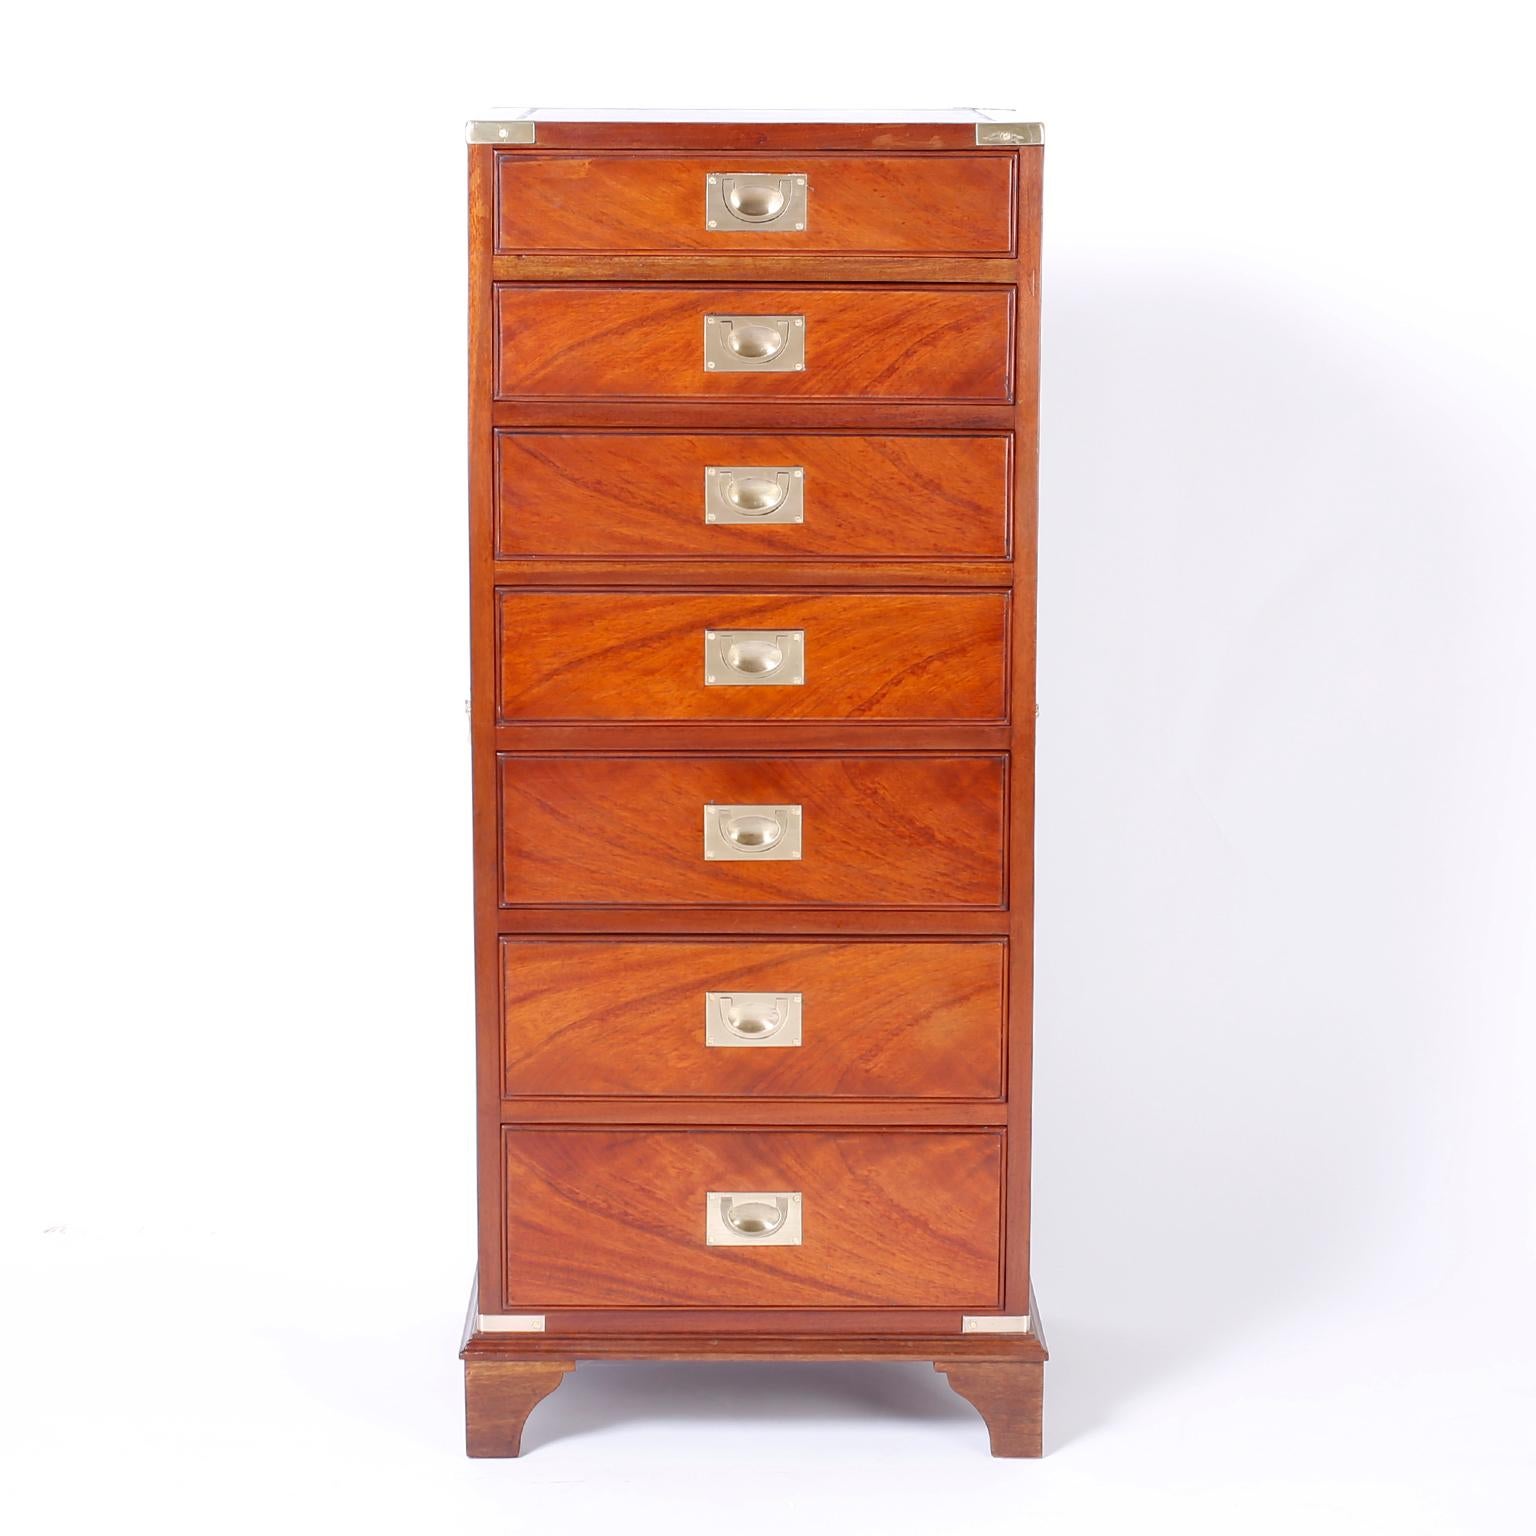 Antique English seven-drawer lingerie chest crafted in mahogany with flame grained side panels, tooled leather top, brass hardware, elegant form and bracket feet.